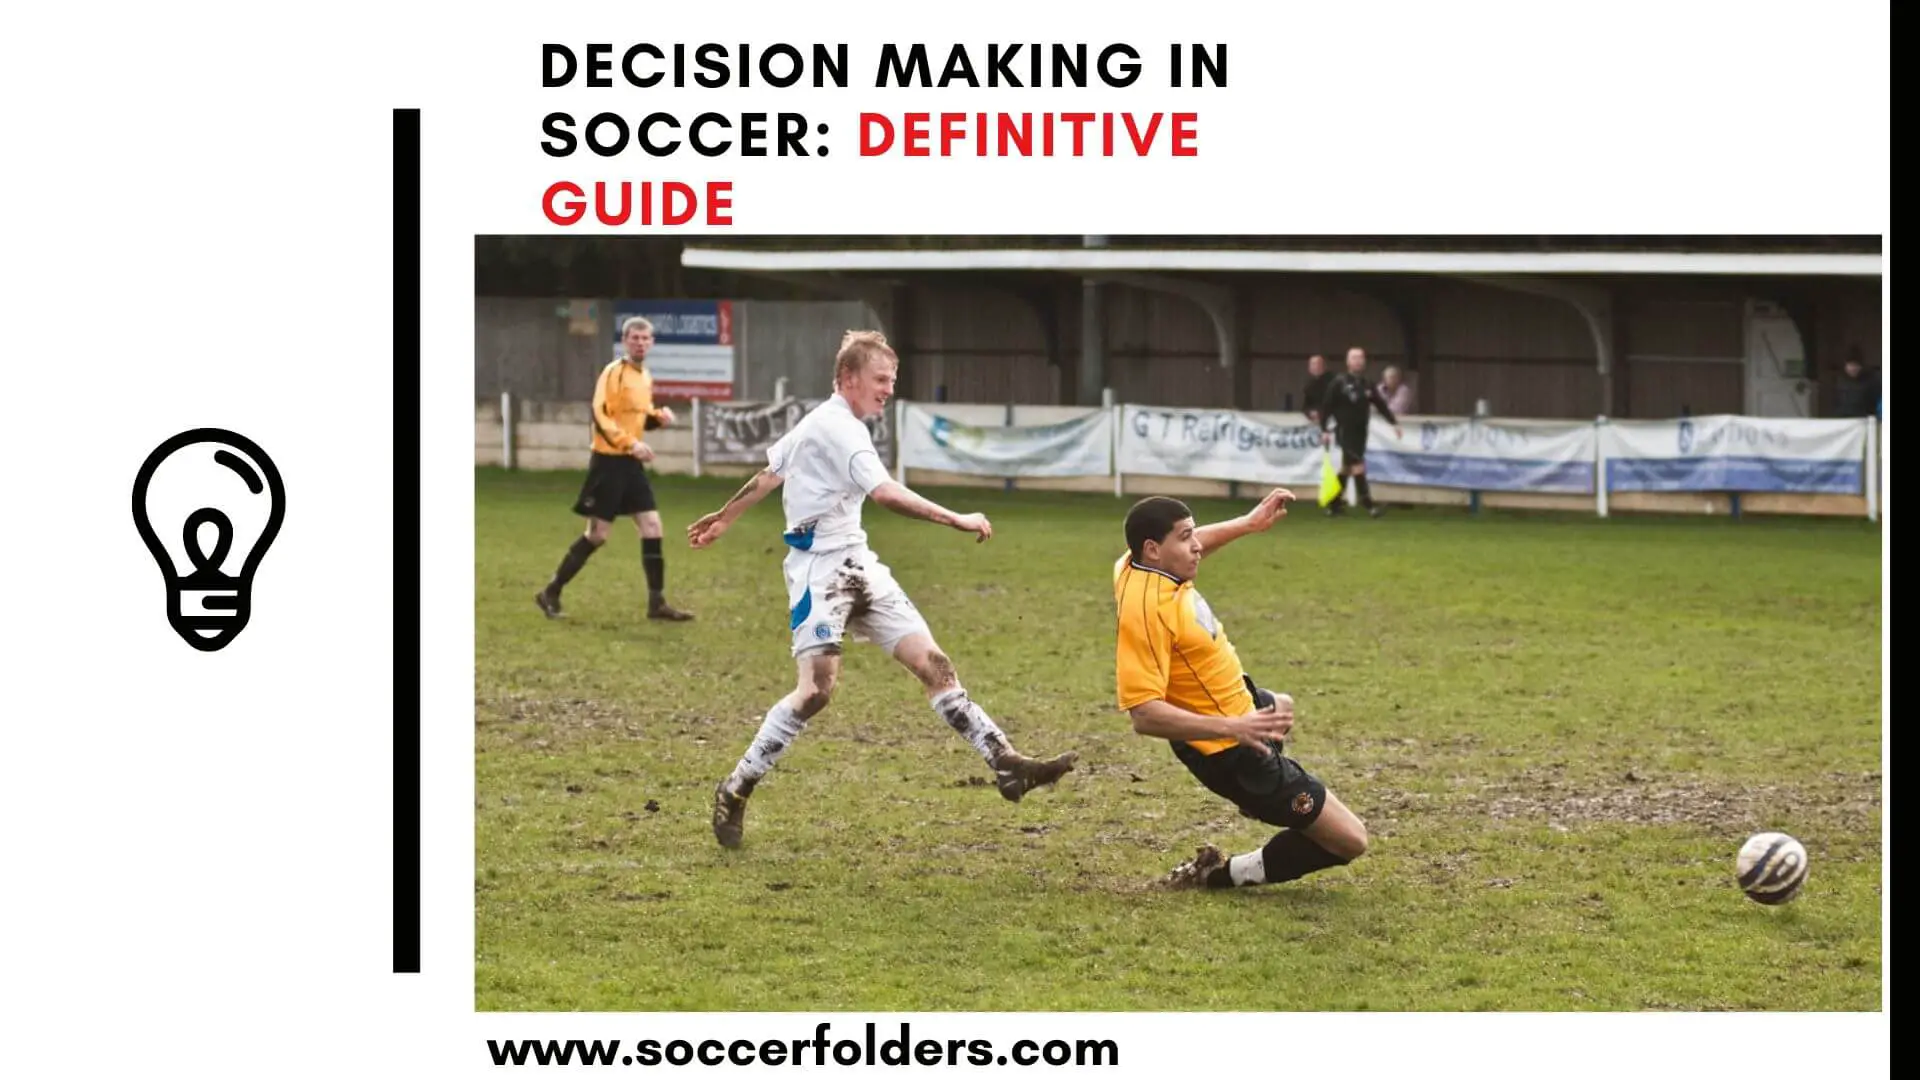 Decision Making in soccer/football - Featured image